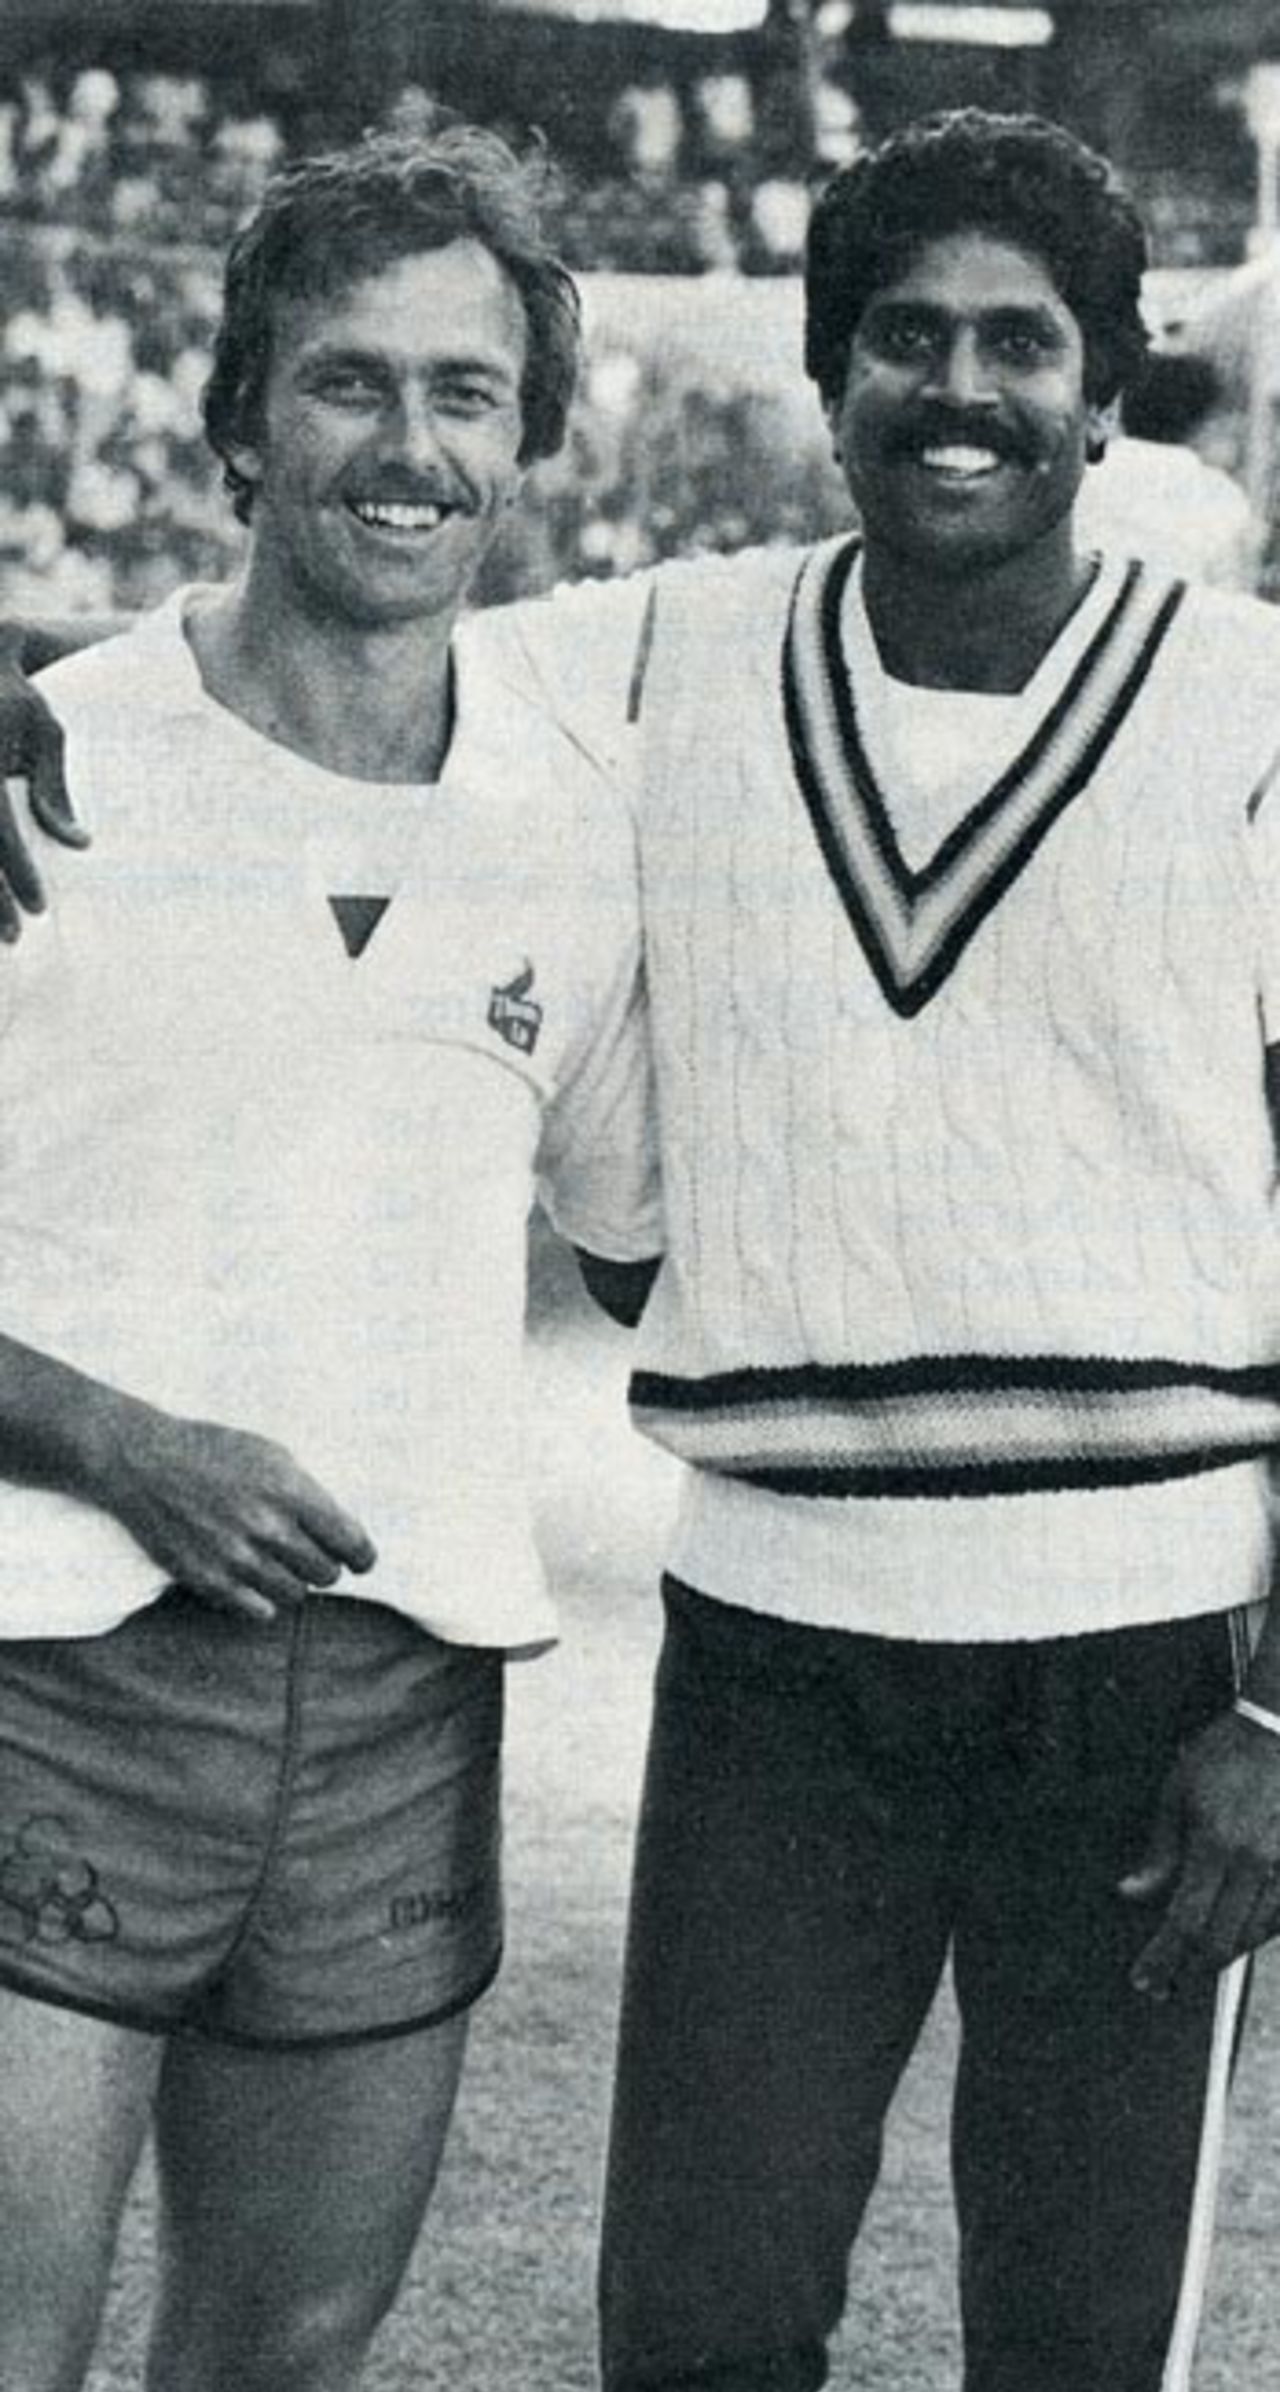 Geoff Cook and Kapil Dev in India, February 24, 1982